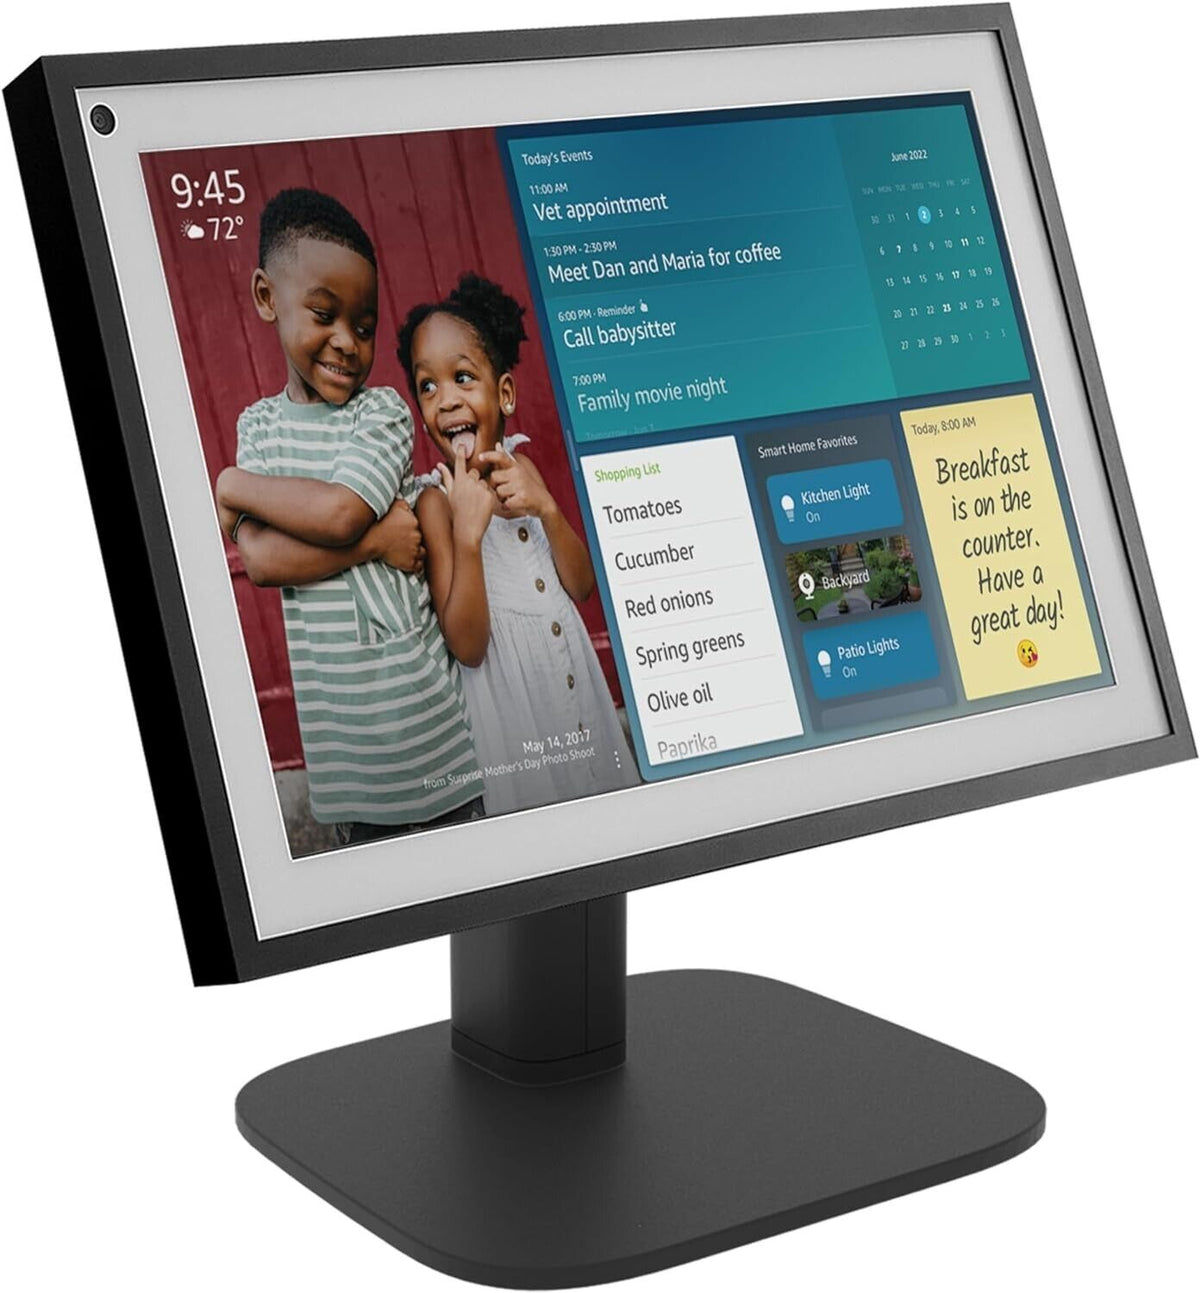 Made for Amazon Tilt Stand, for Echo Show 15